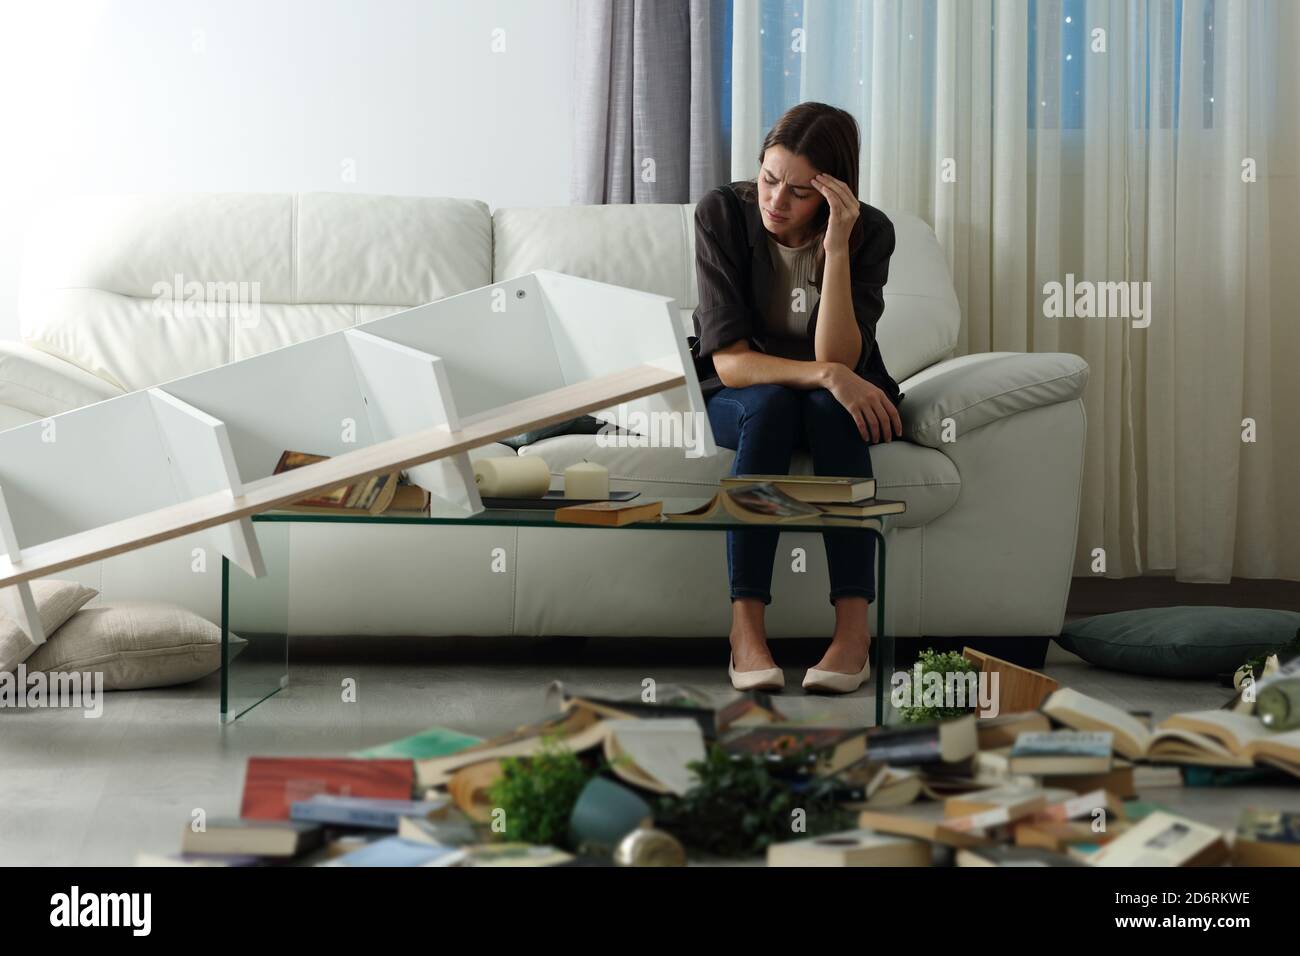 Sad tenant complaining after home robbery sitting on a couch in the night with messy living room Stock Photo